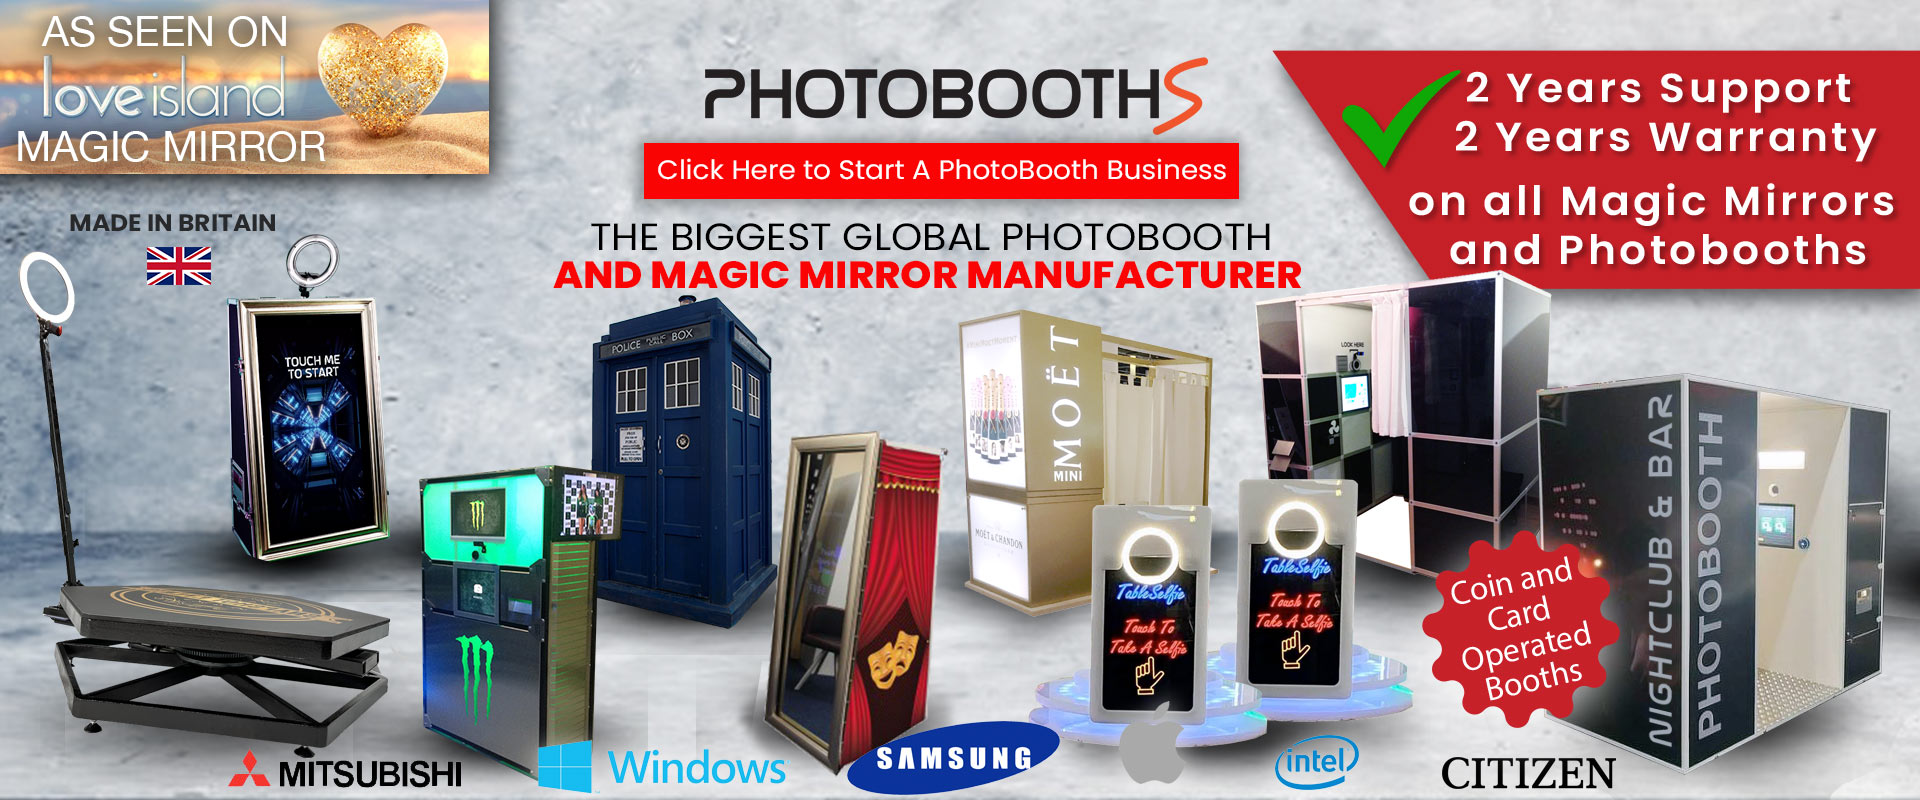 Photobooths Image showing 360 Photobooth, Magic Mirror, Table Photo Booth, traditional oval booth and more